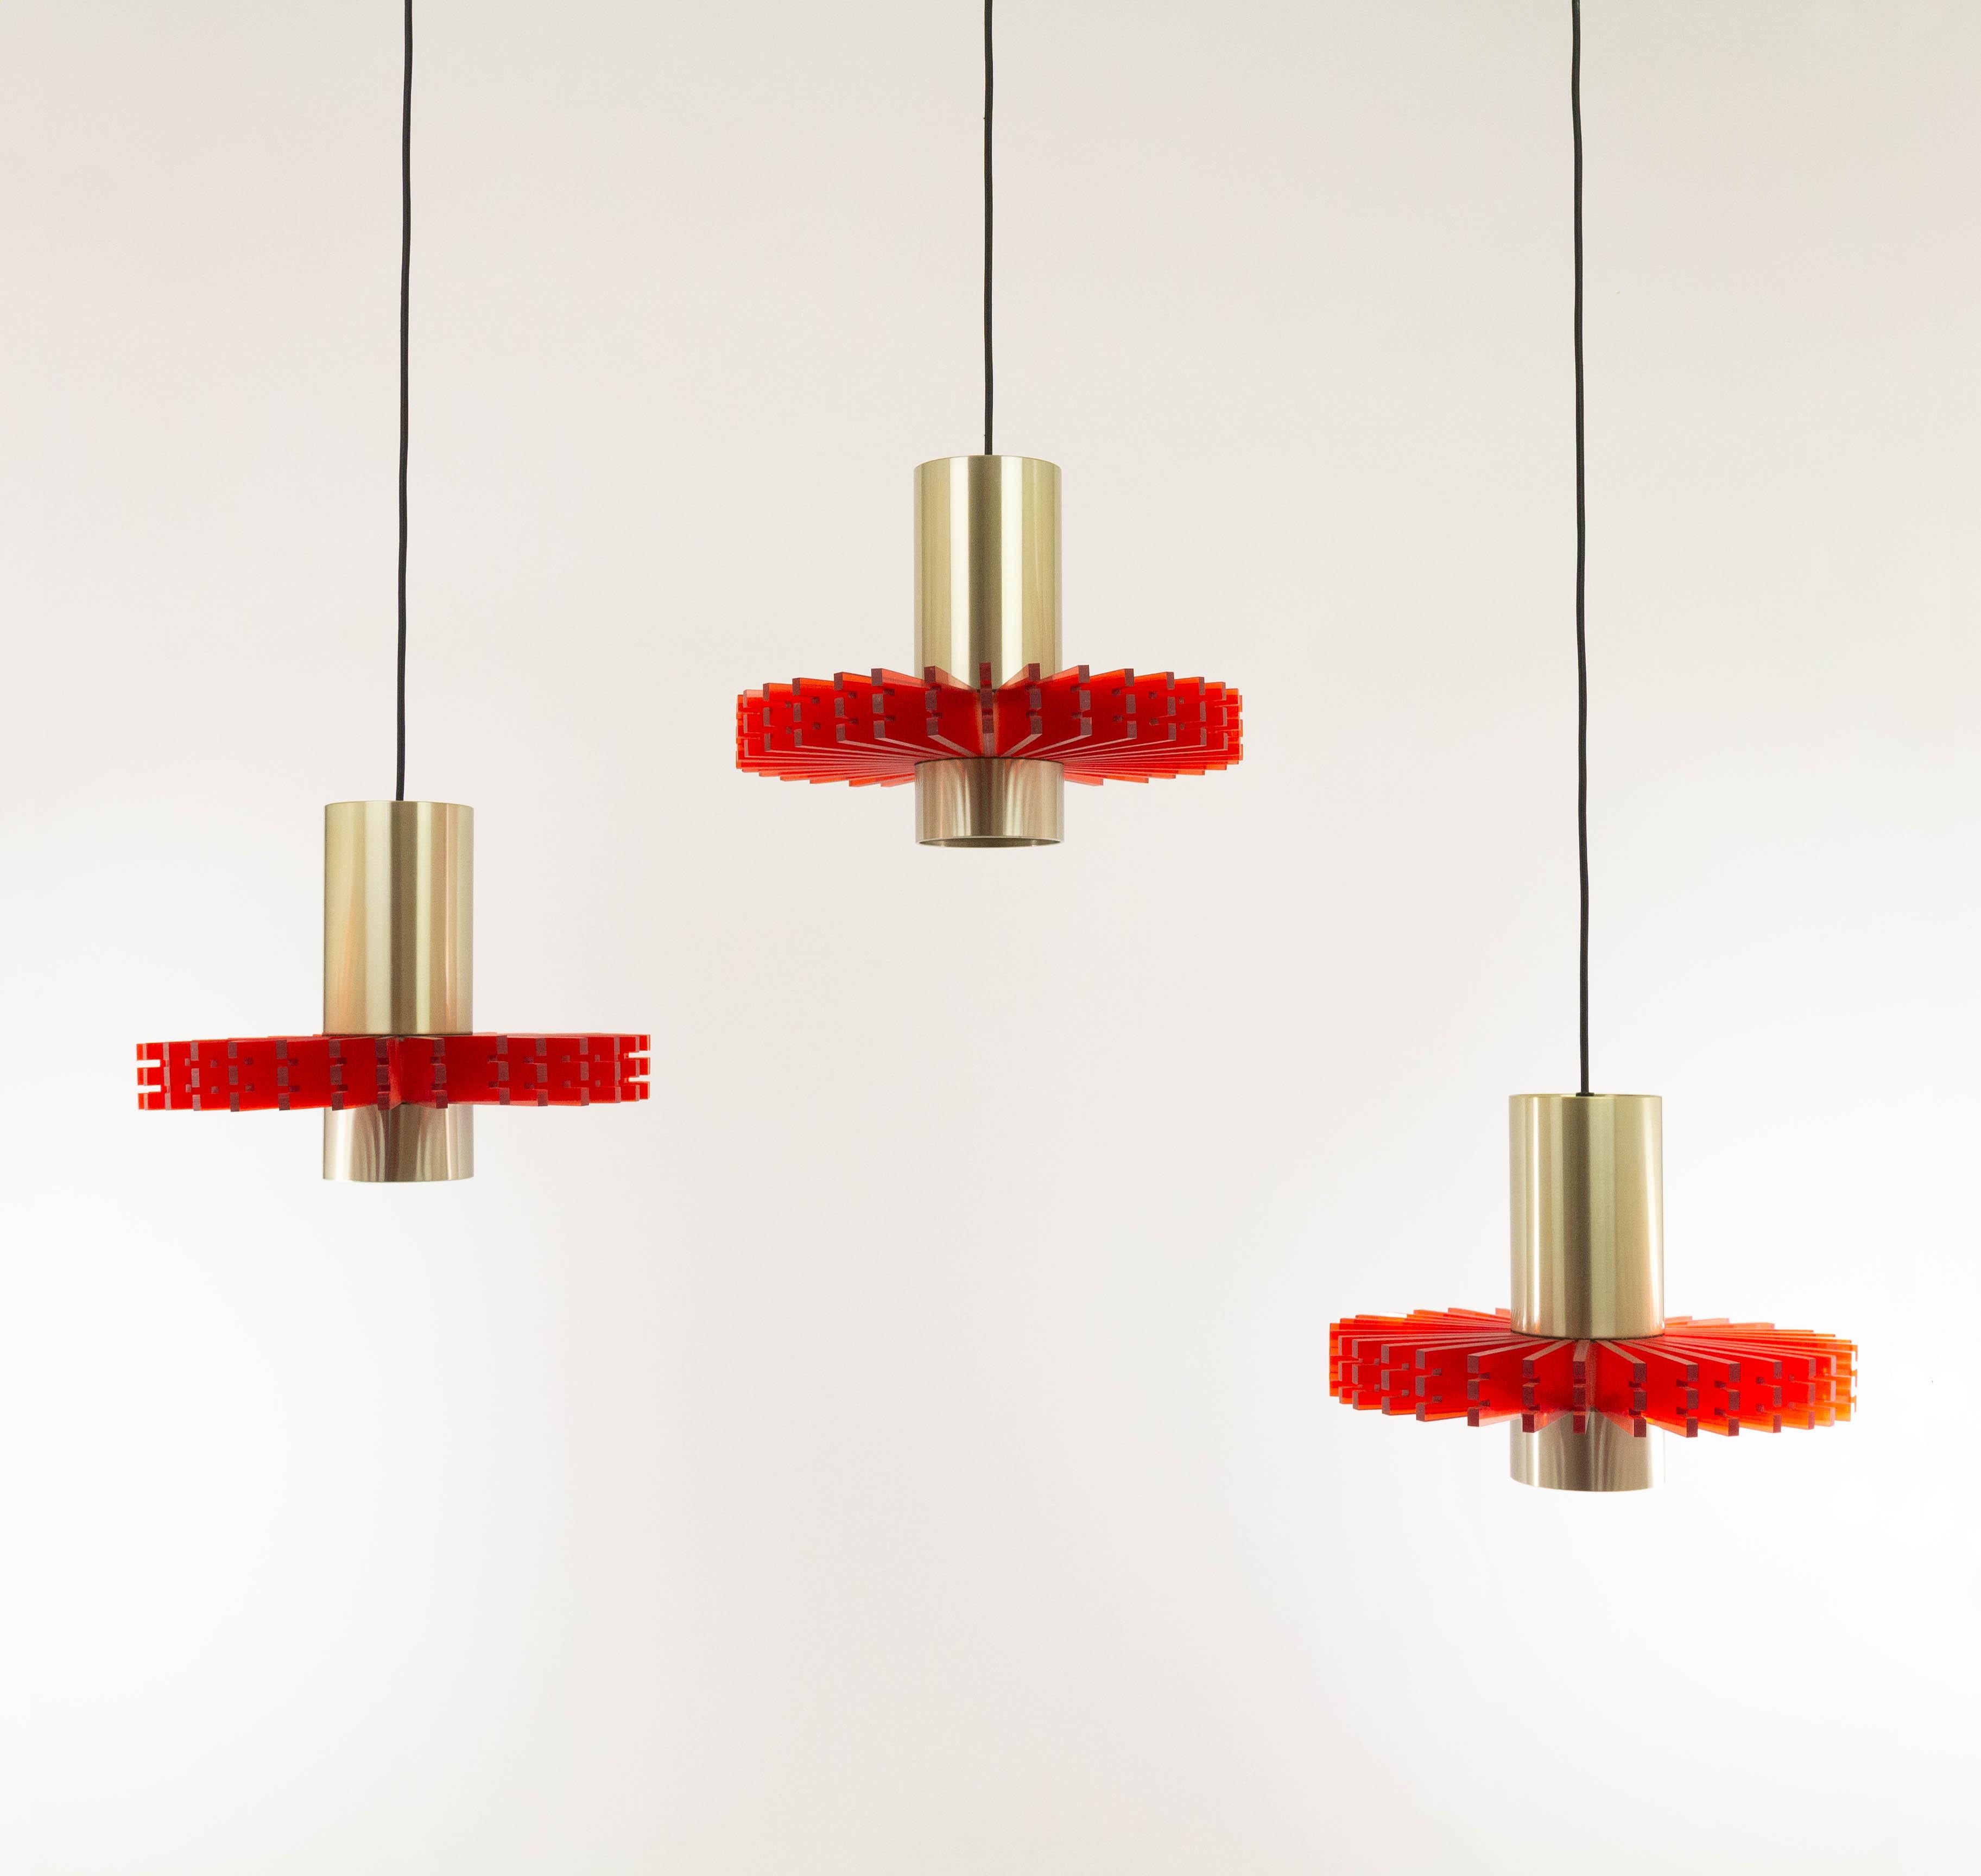 Set of three aluminium and acrylic pendants, nicknamed 'Priest collar', designed by Claus Bolby for Danish lighting manufacturer Cebo in -most probably- the 1960s.

Each pendant consists of two round brass colored aluminium elements which are joined